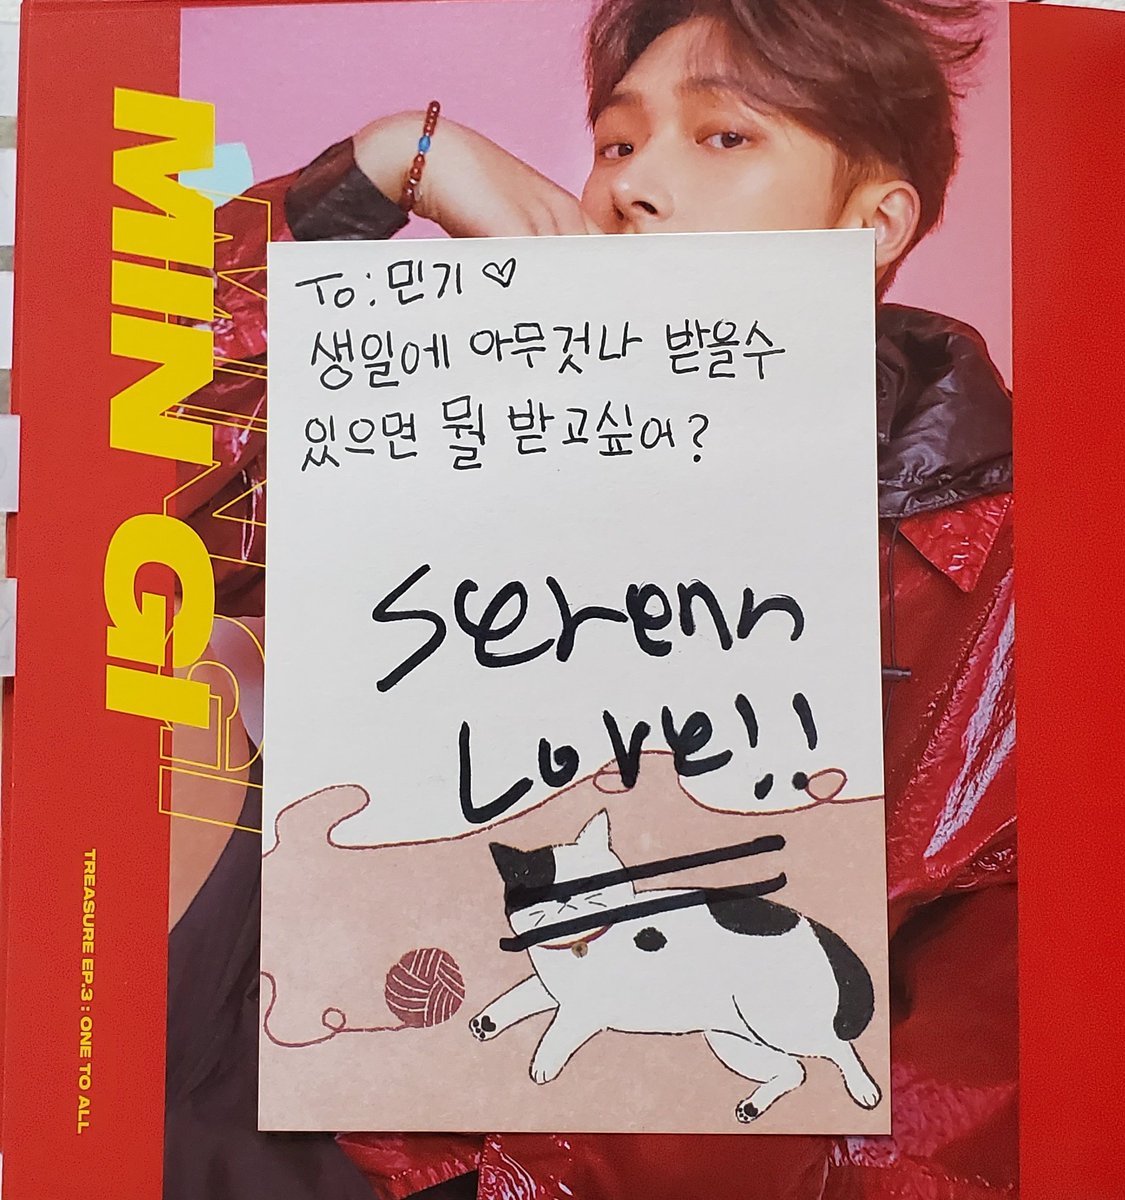 190808 ATEEZ fansign in Melbourne 》 MingiQ: If you could have anything for your birthday what would you want?A: Serena Love!! (Lol he messed up the a but it's okay )So cringe but he's cute. #ATEEZ  #ATEEZGLOBALFANSIGN  #ATEEZinMELBOURNE  #에이티즈  #민기  #송민기